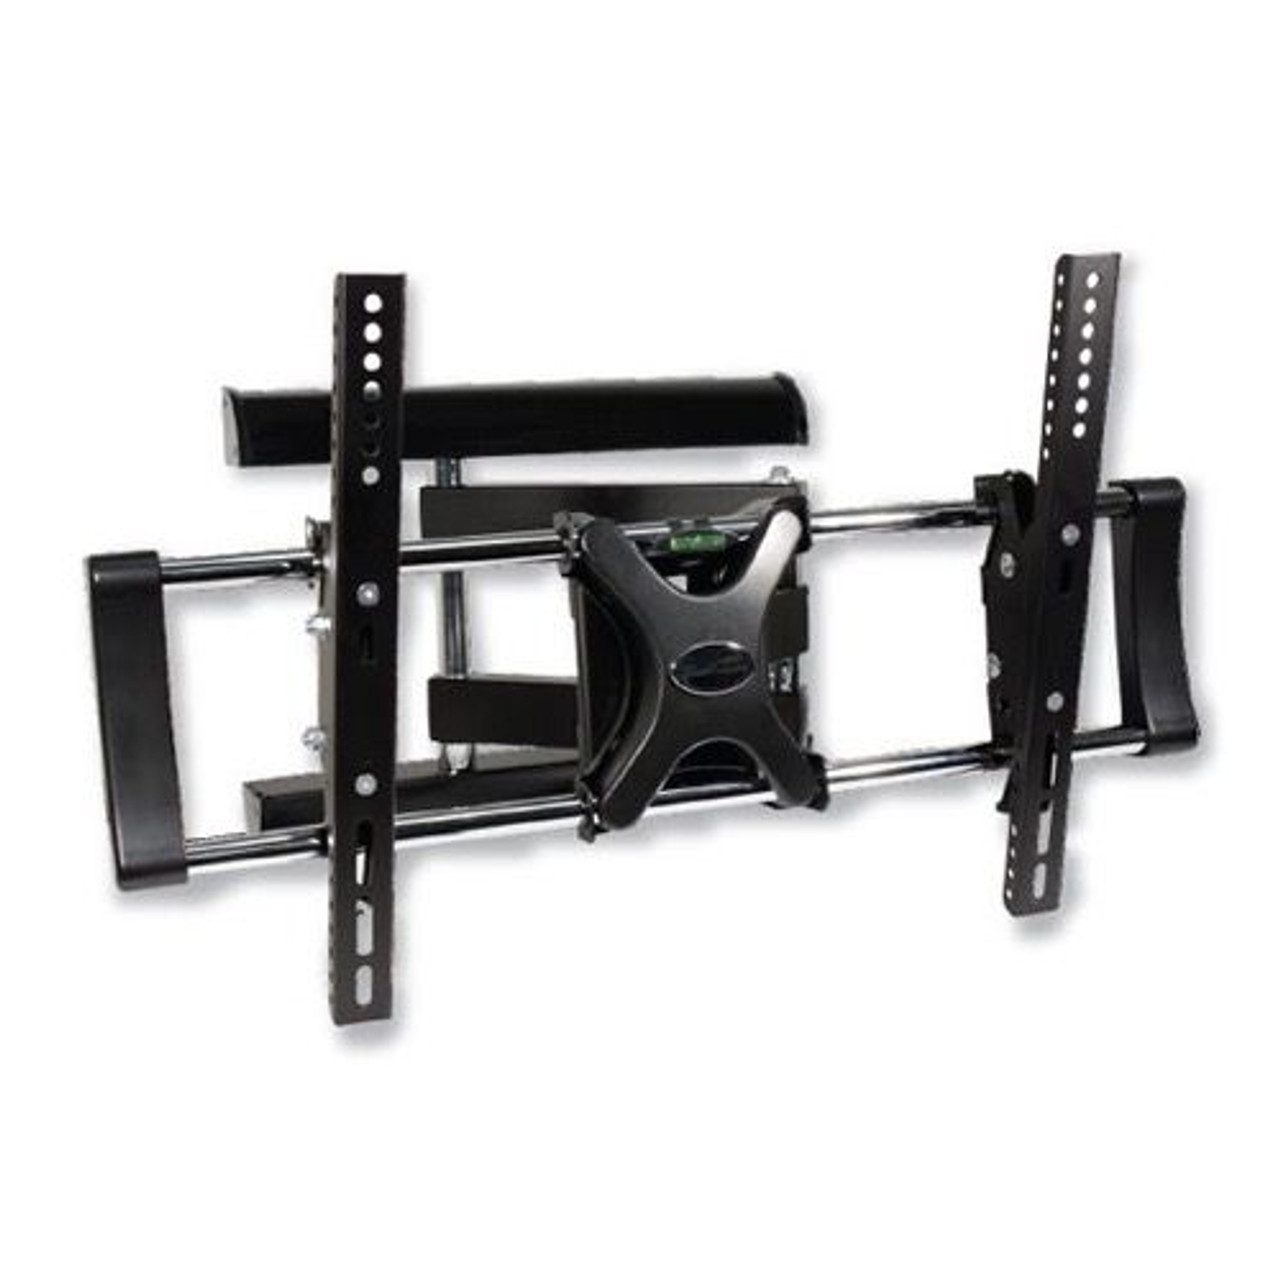 Sequence 720-110 Medium Articulating TV Wall Mount for TVs From 32" to 55" 132 Lb Load Low Profile Panel by Steren